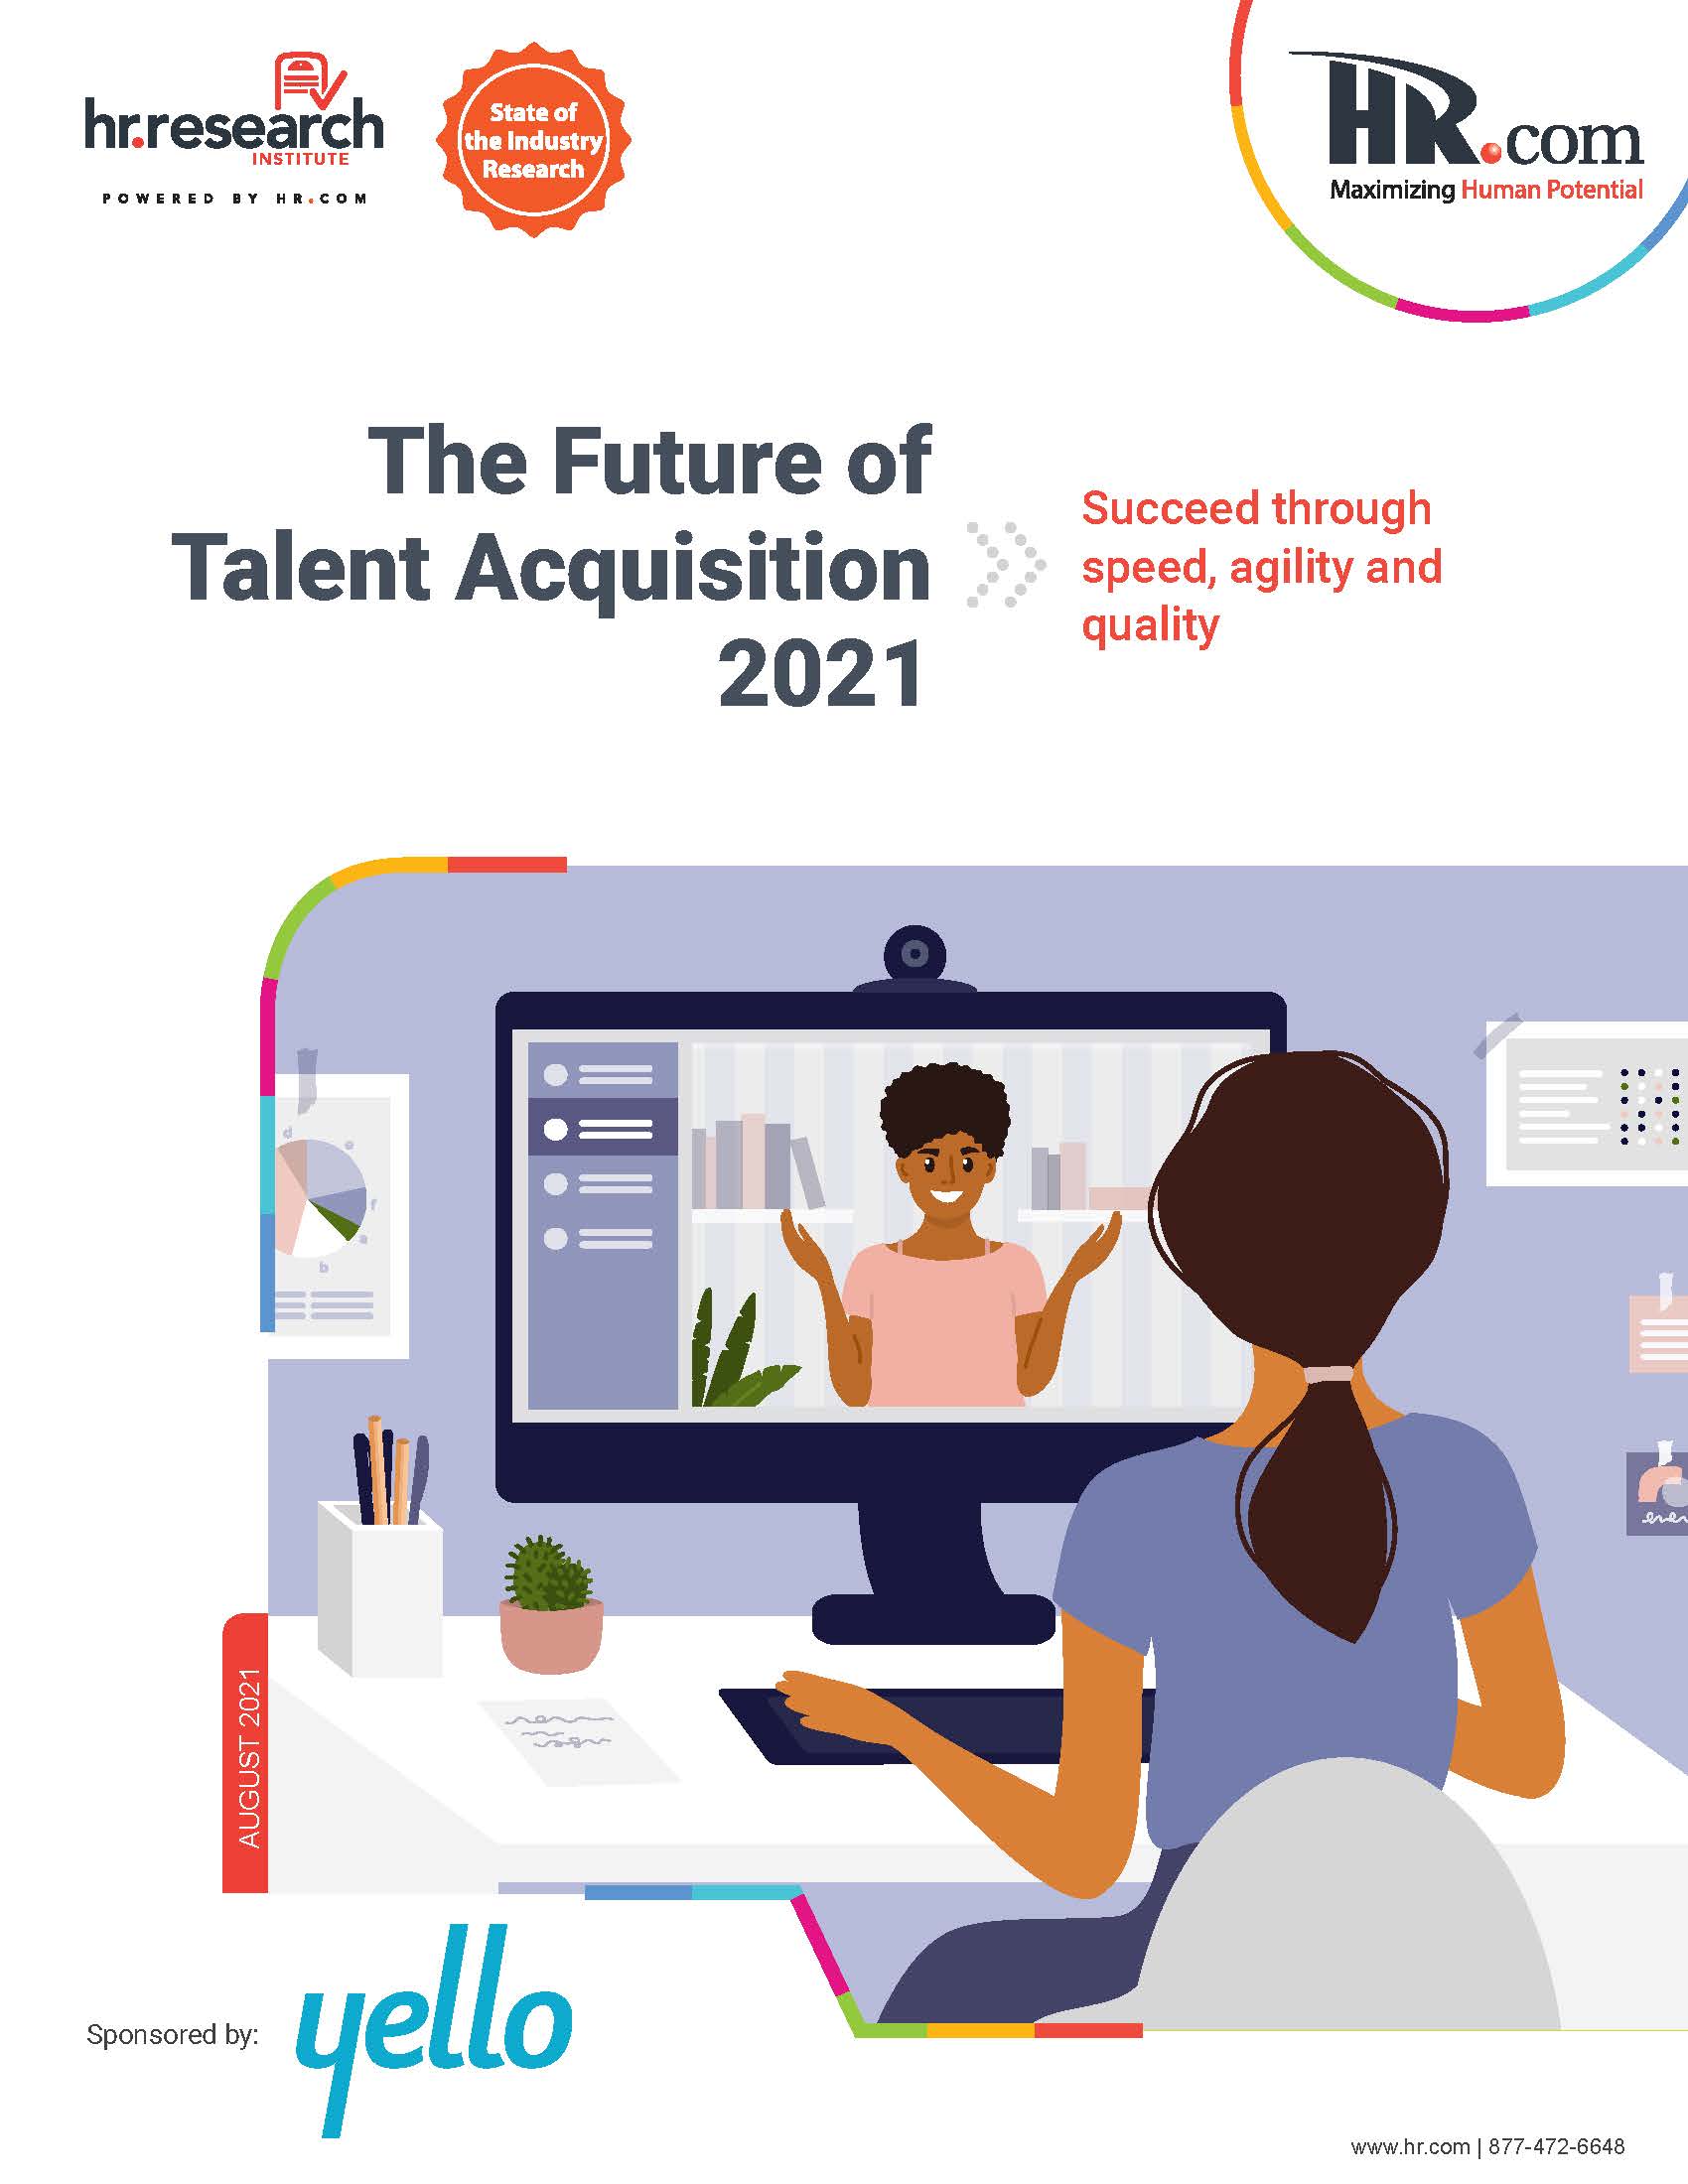 The Future of Talent Acquisition 2021